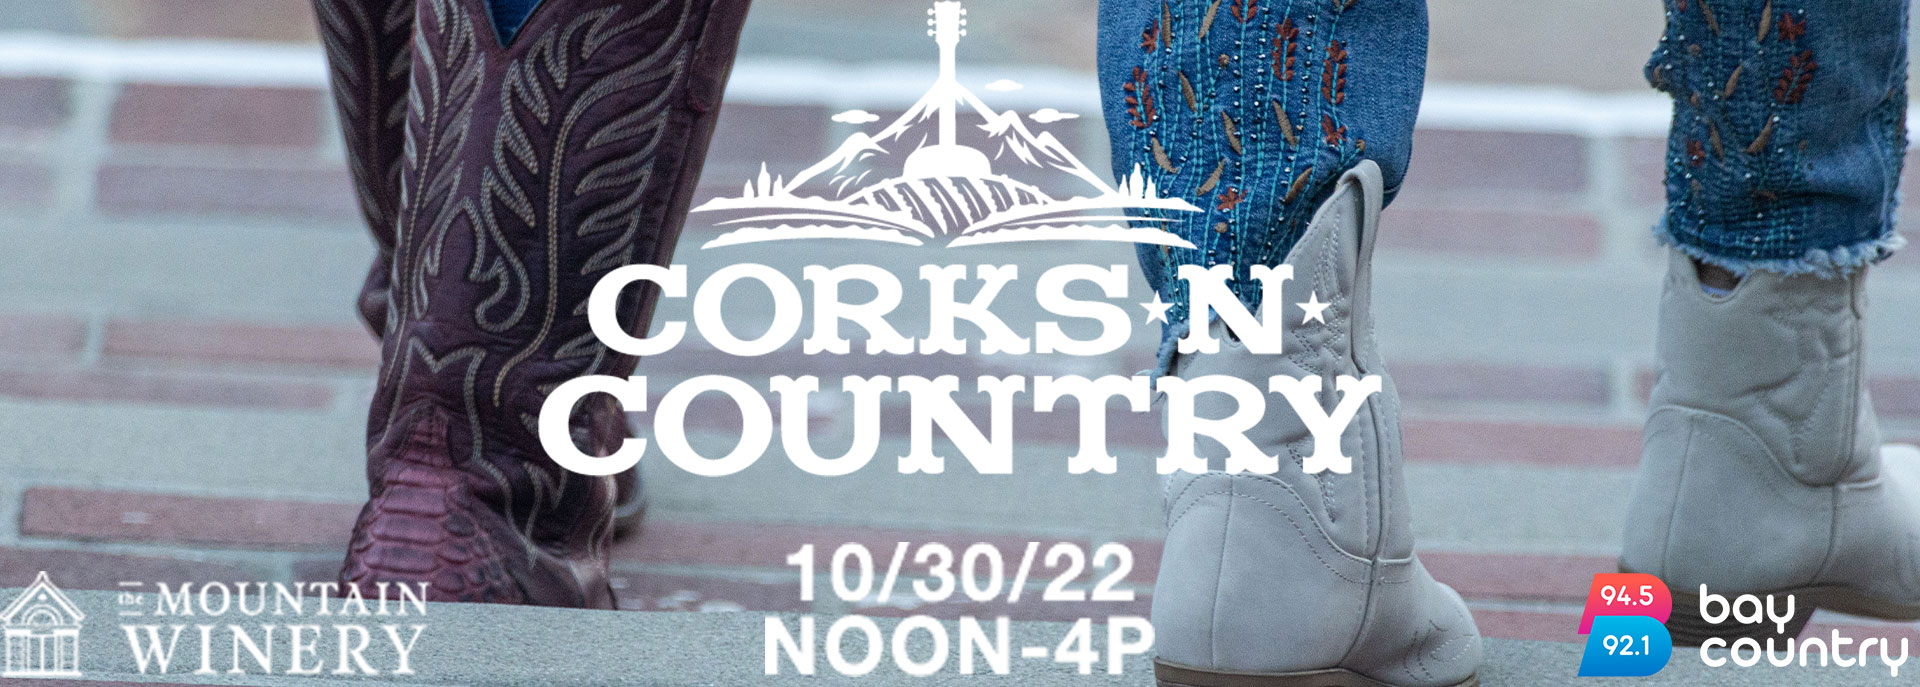 Corks N Country - October 30, 2002 poster